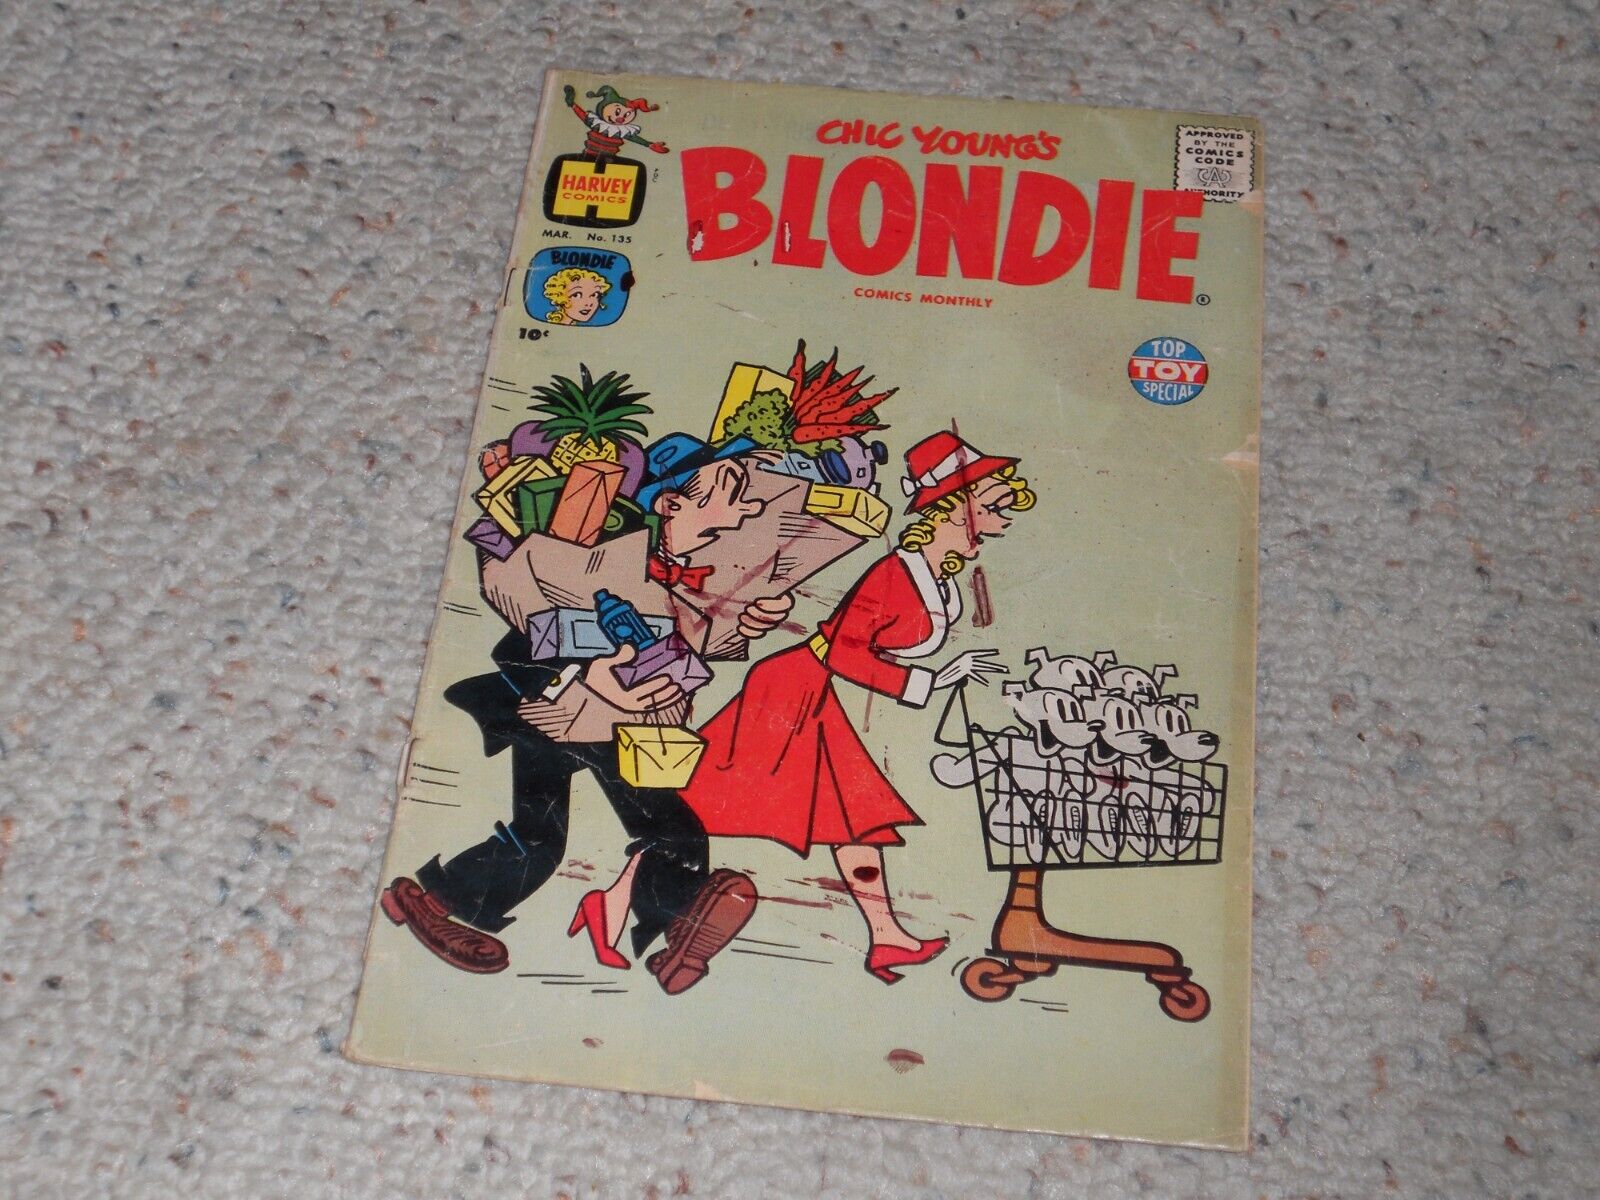 1960 Chic Young's BLONDIE Harvey Comic Book #135 - FROM BAD TO WORSE